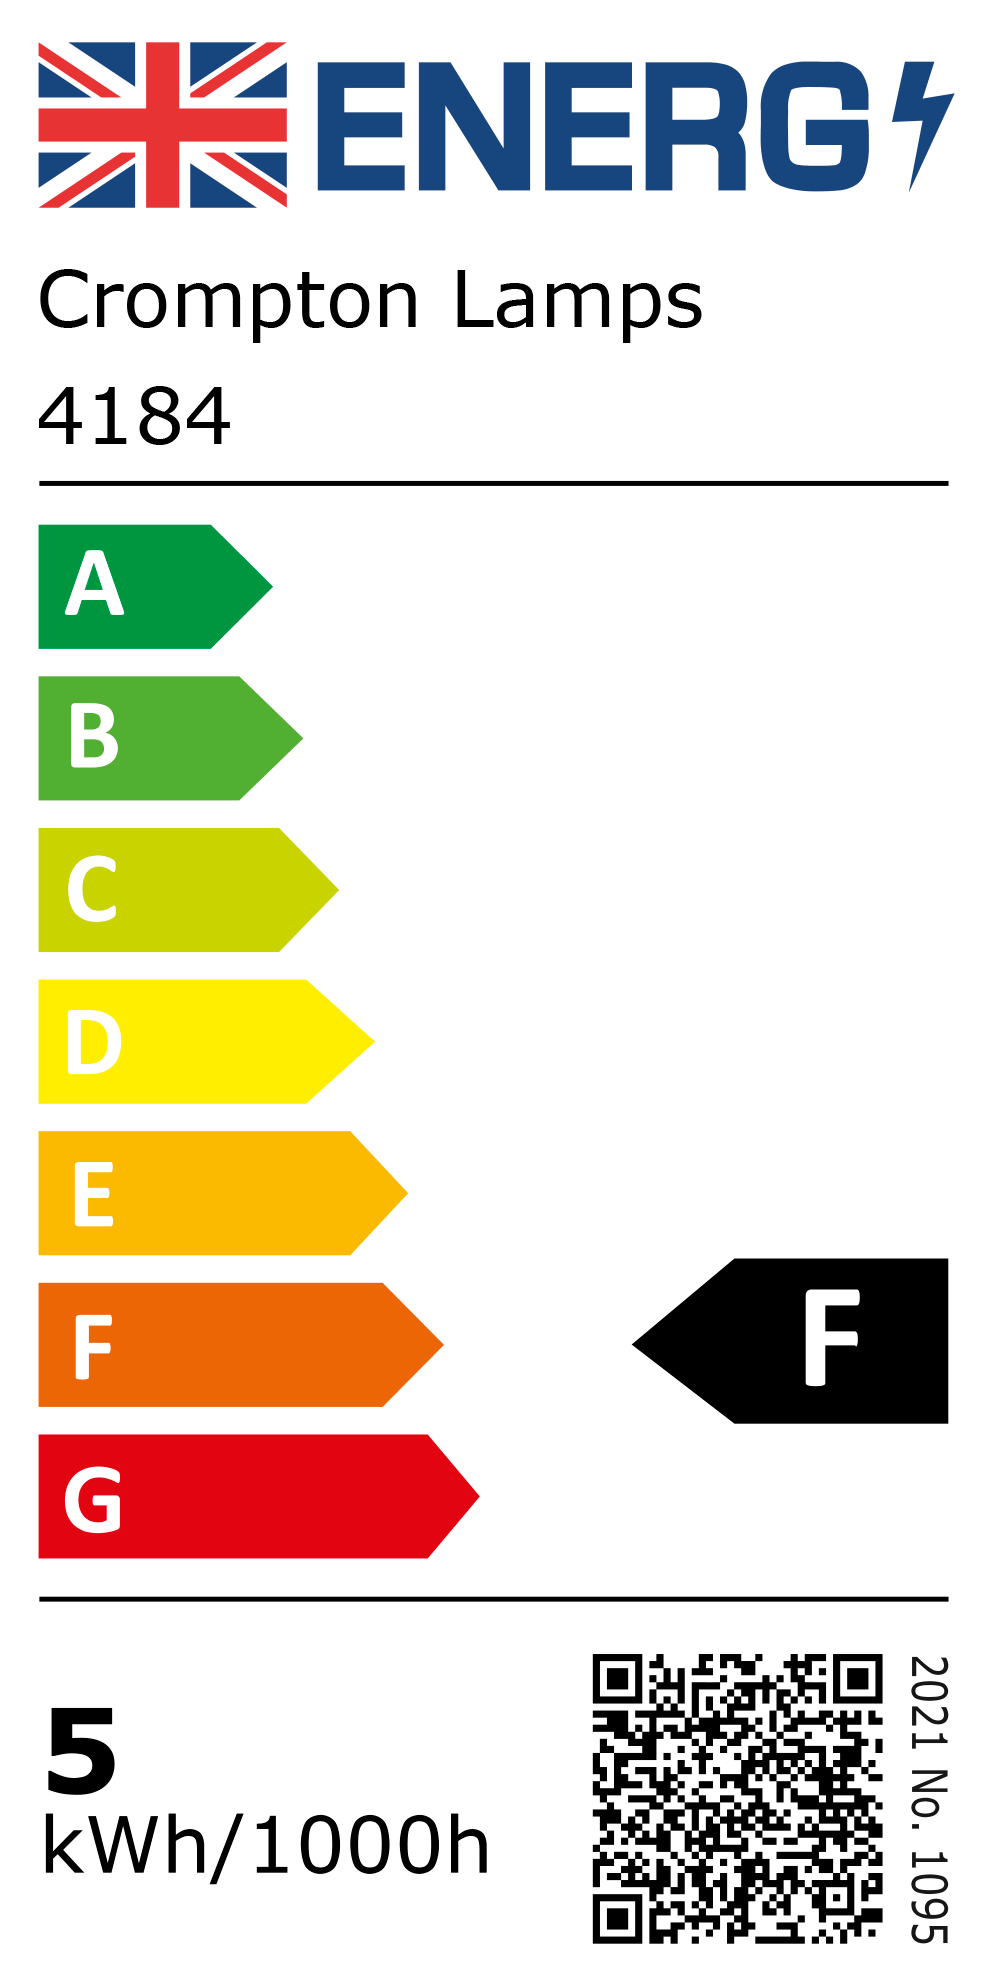 New 2021 Energy Rating Label: Stock Code 4184